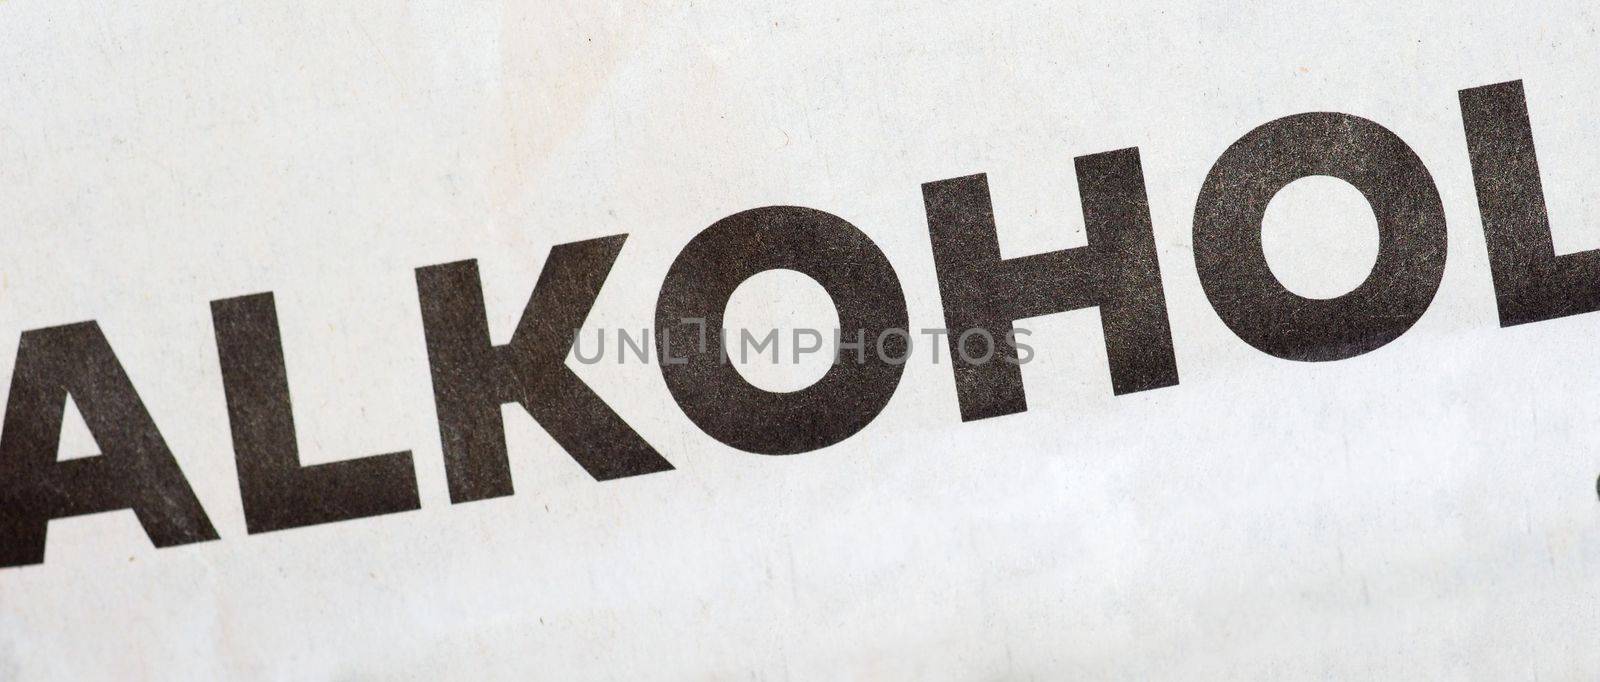 Alkohol (translation: Alcohol) printed in black on white paper